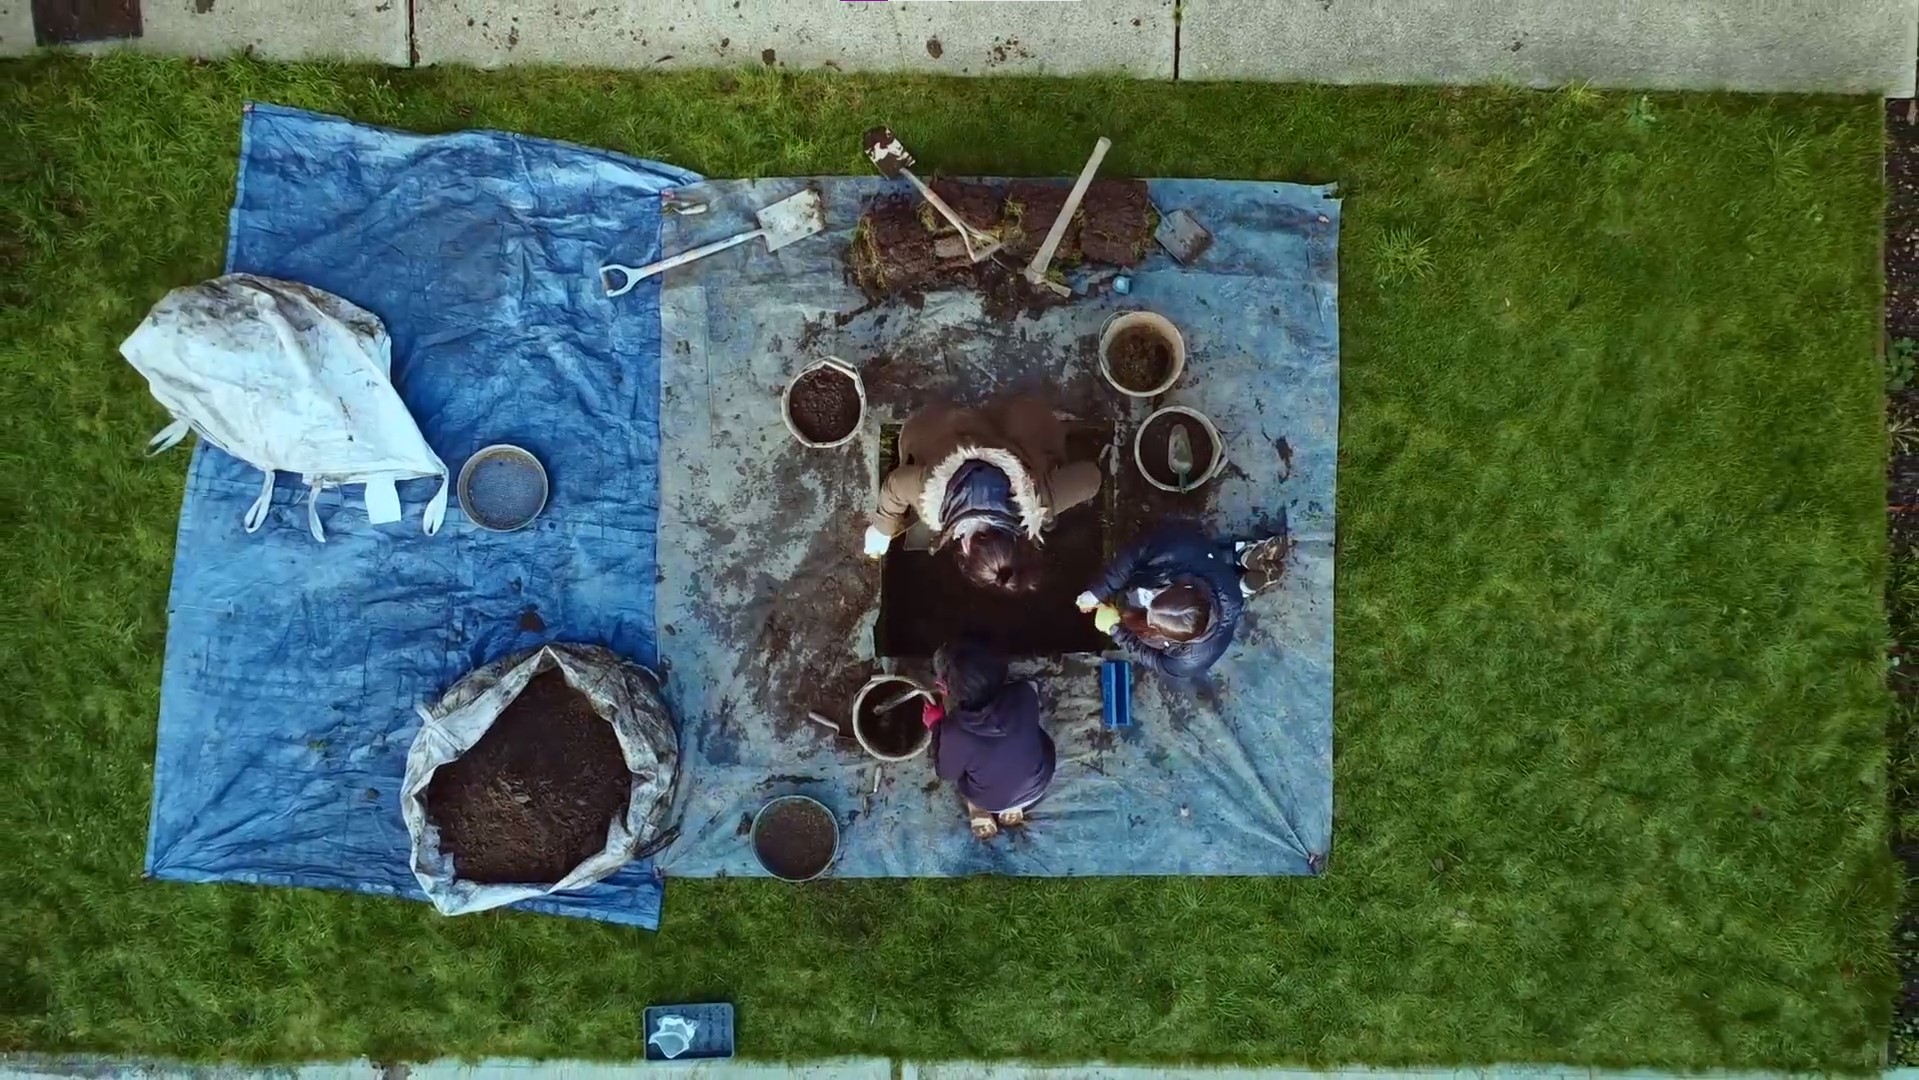 Aerial view of three warmly dressed people around a test pit dug in a grassy area. There are pots of soil, digging tools and blue sheeting around them. A paved surface is visible at the edge of the frame.